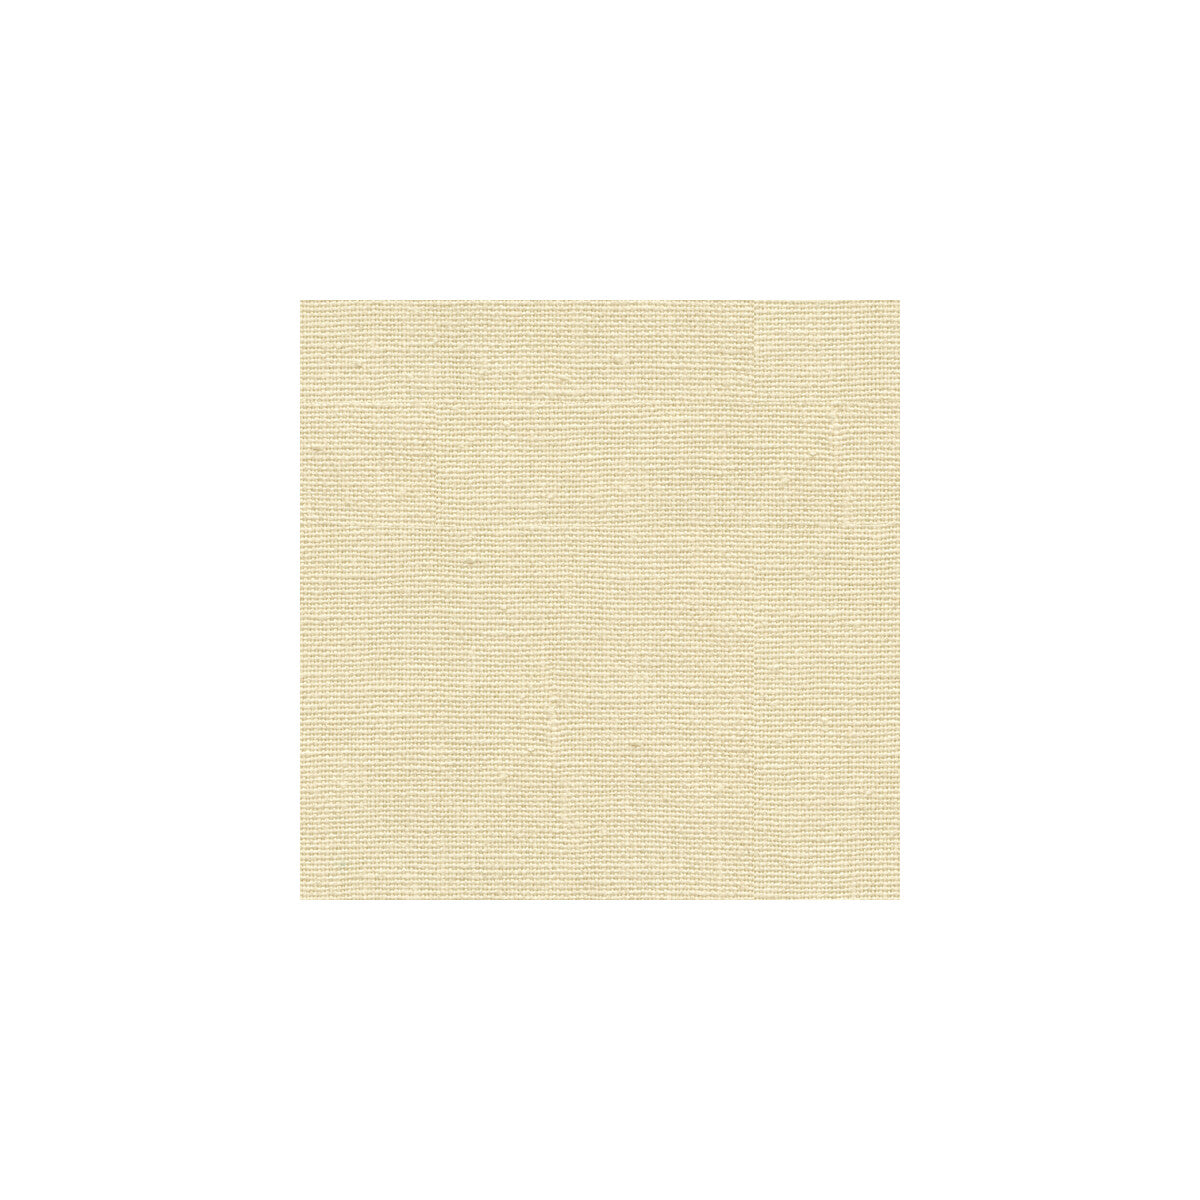 Kravet Basics fabric in 32260-16 color - pattern 32260.16.0 - by Kravet Basics in the Perfect Plains collection